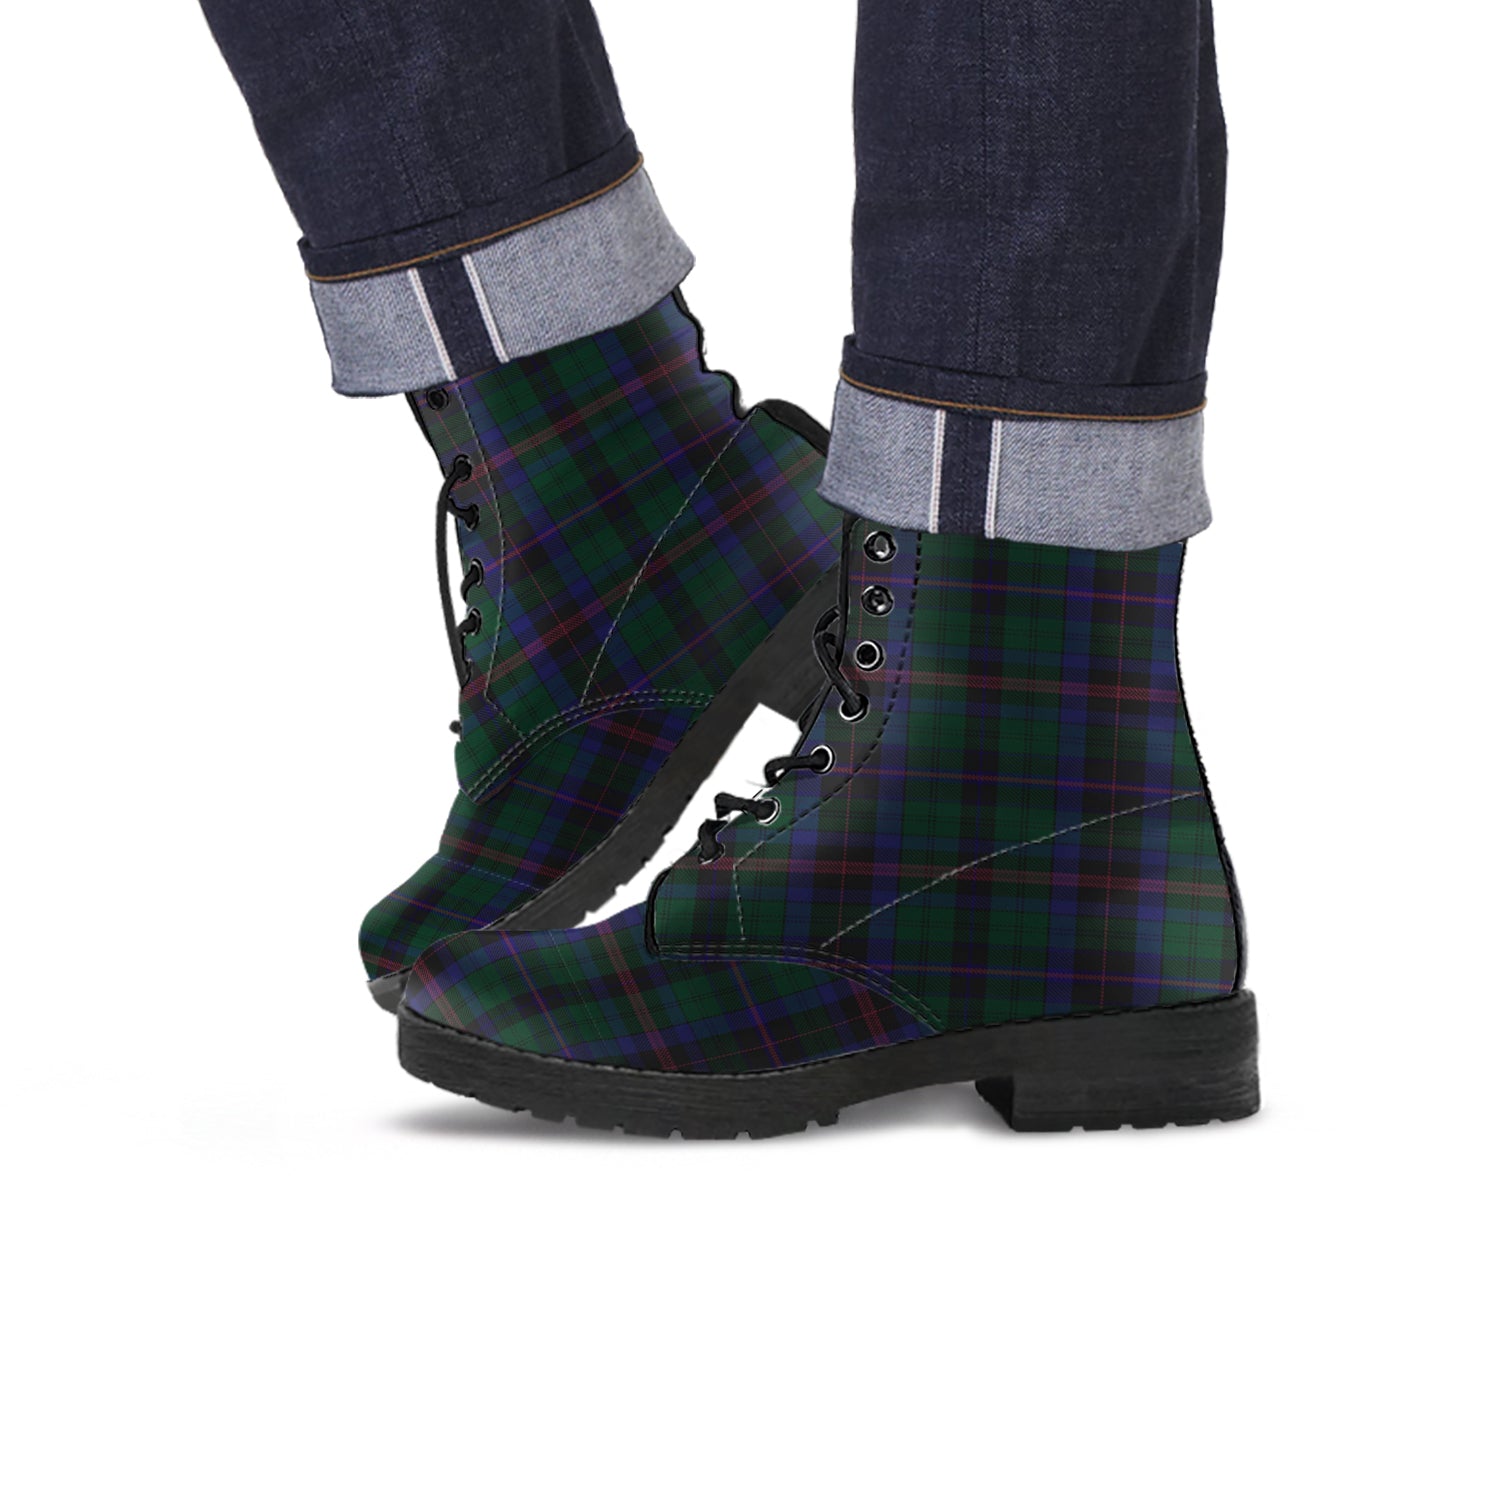 phillips-of-wales-tartan-leather-boots